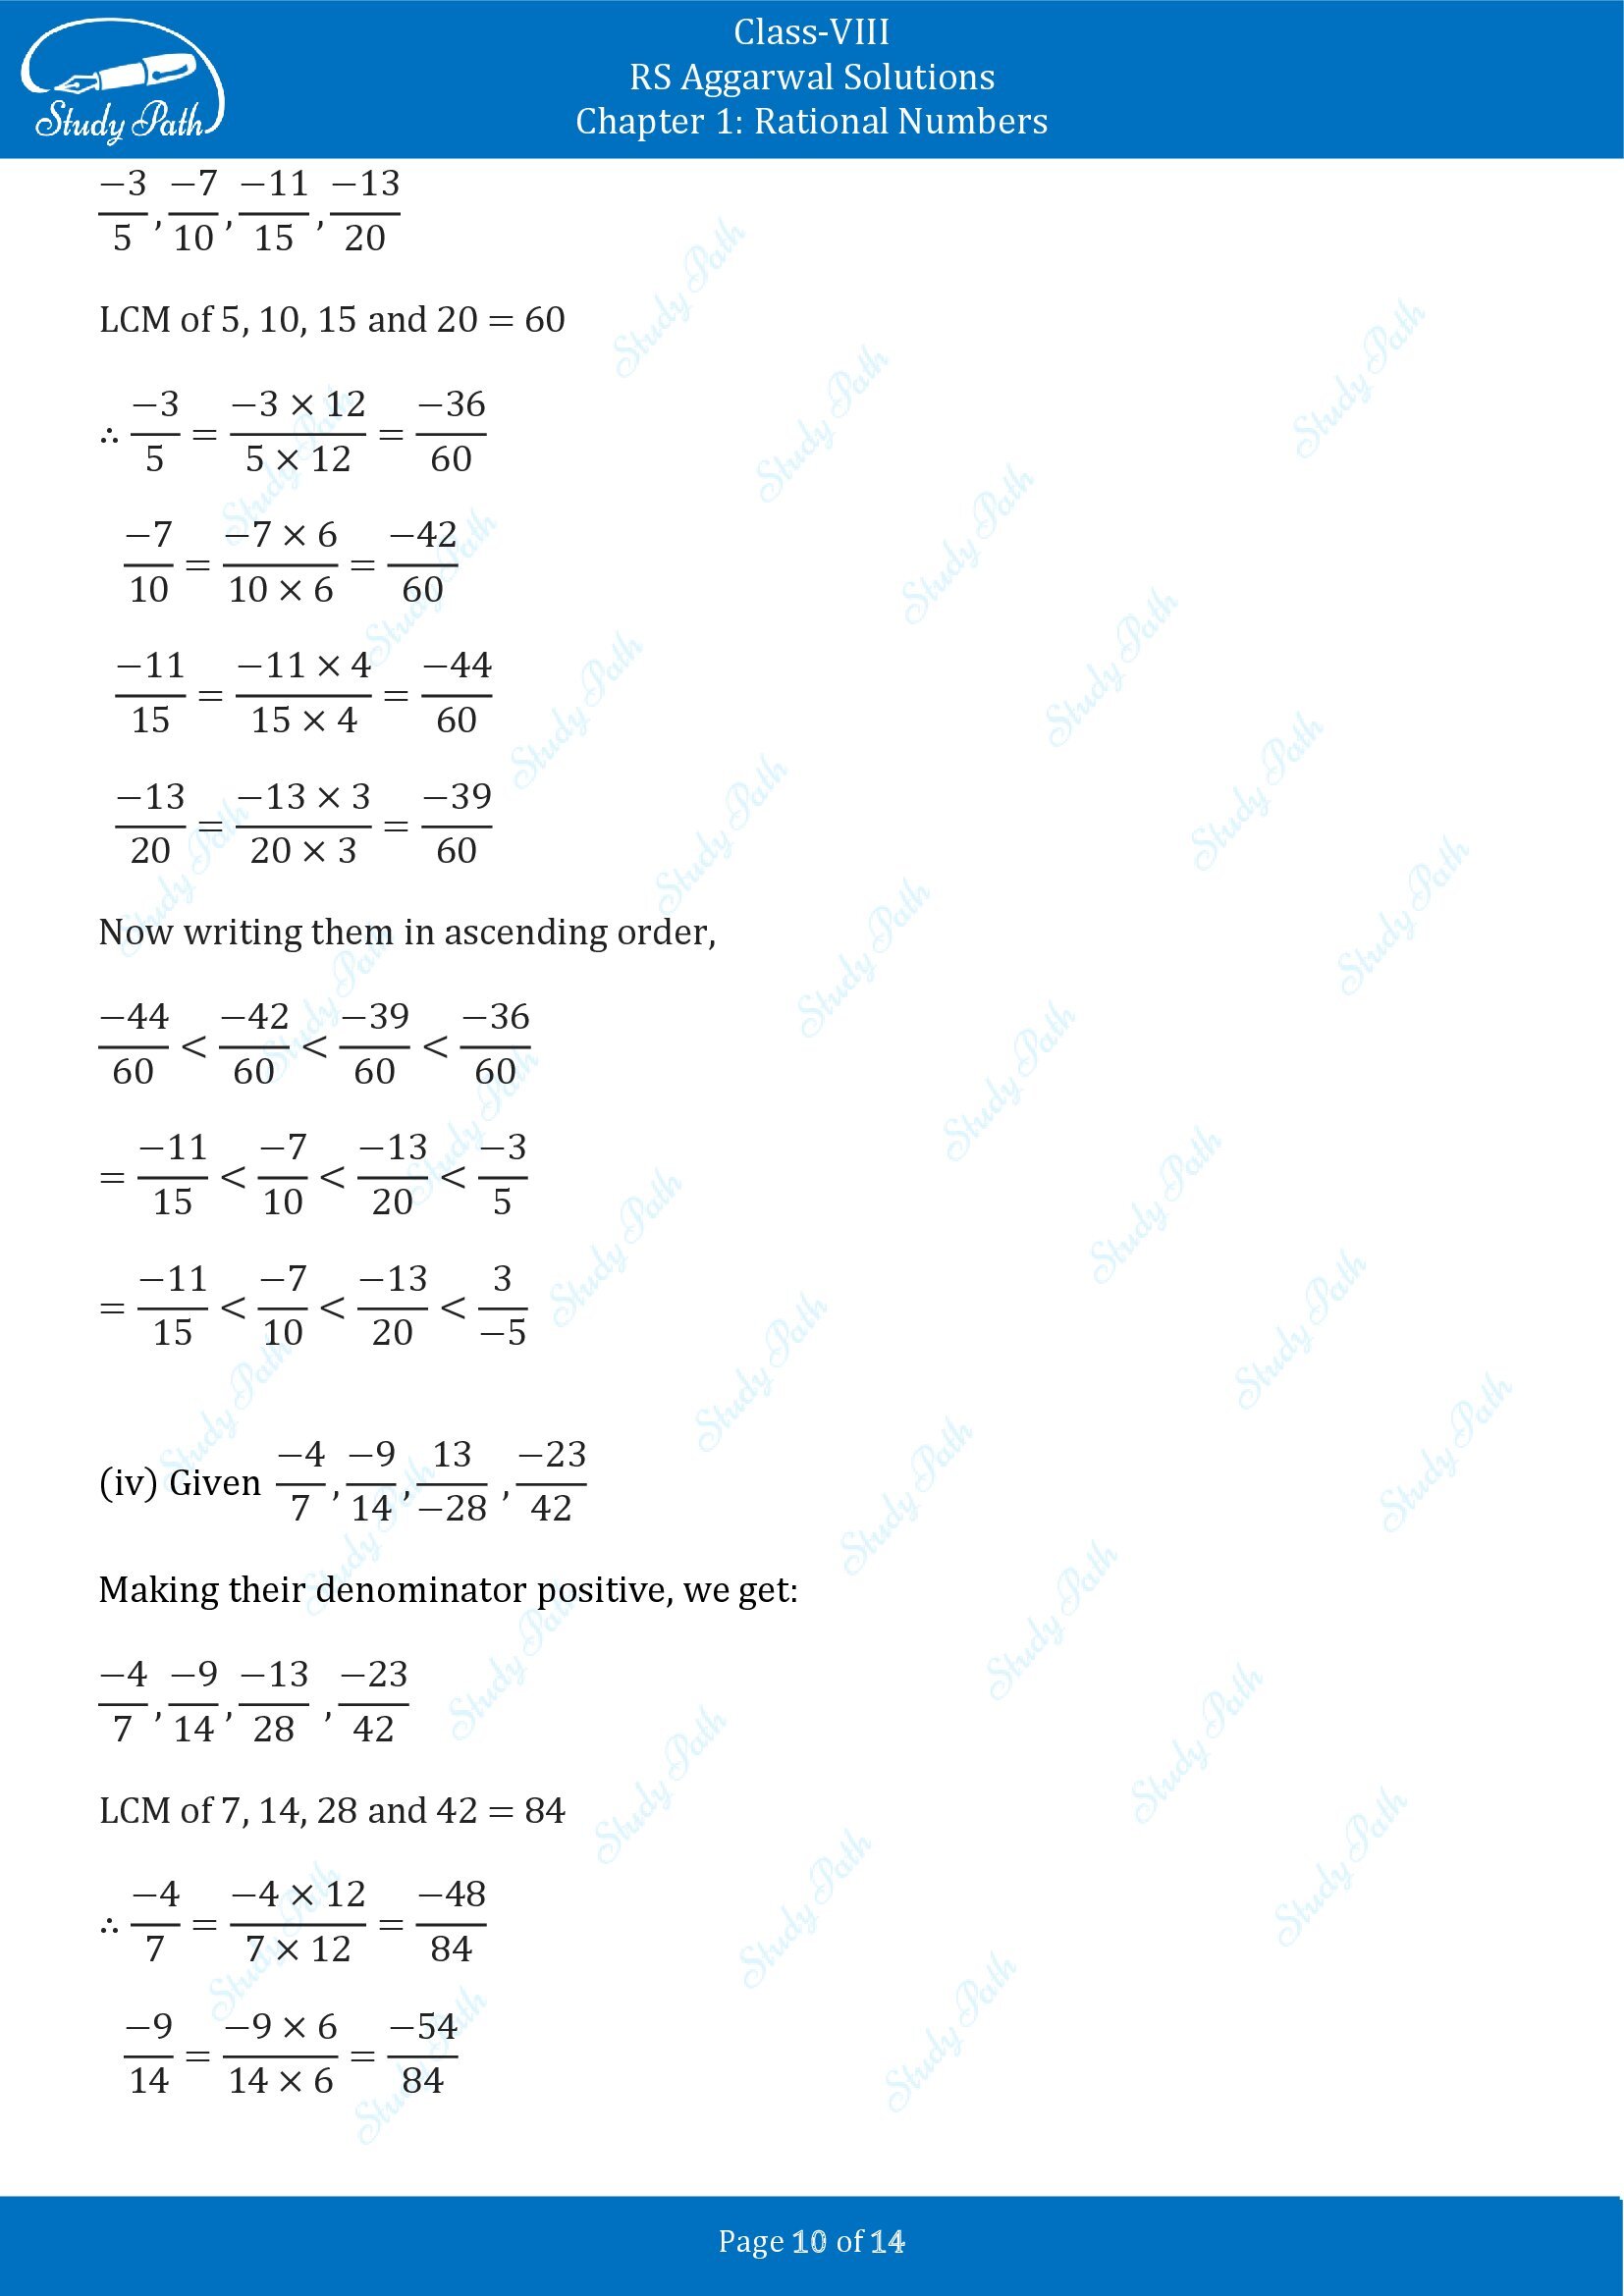 RS Aggarwal Solutions Class 8 Chapter 1 Rational Numbers Exercise 1A 00010